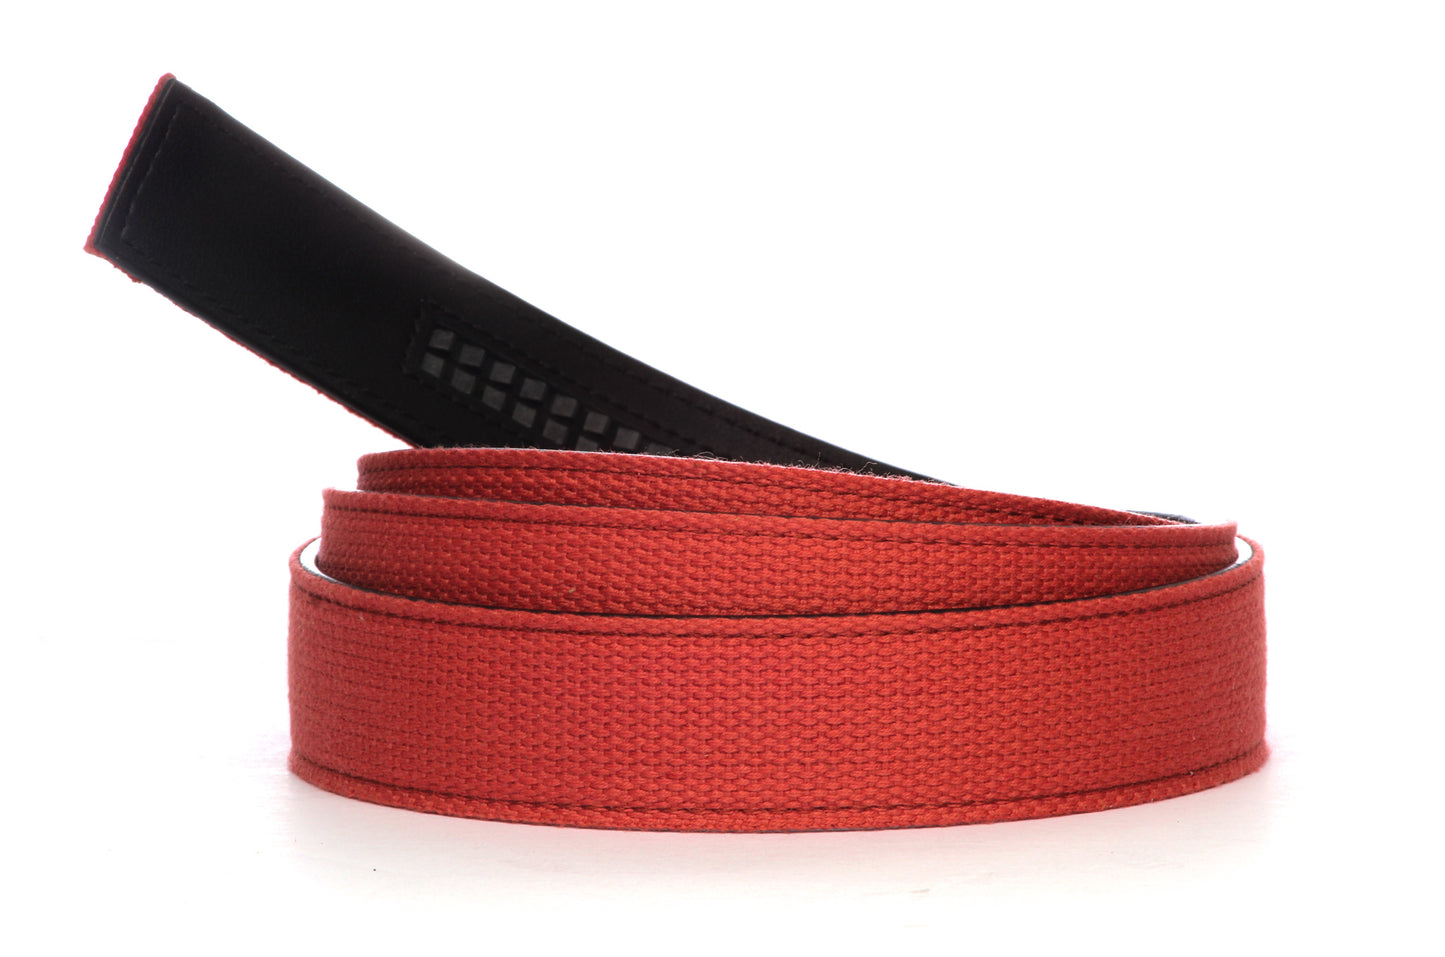 Men's canvas belt strap in salmon with a 1.25-inch width, casual look, microfiber back